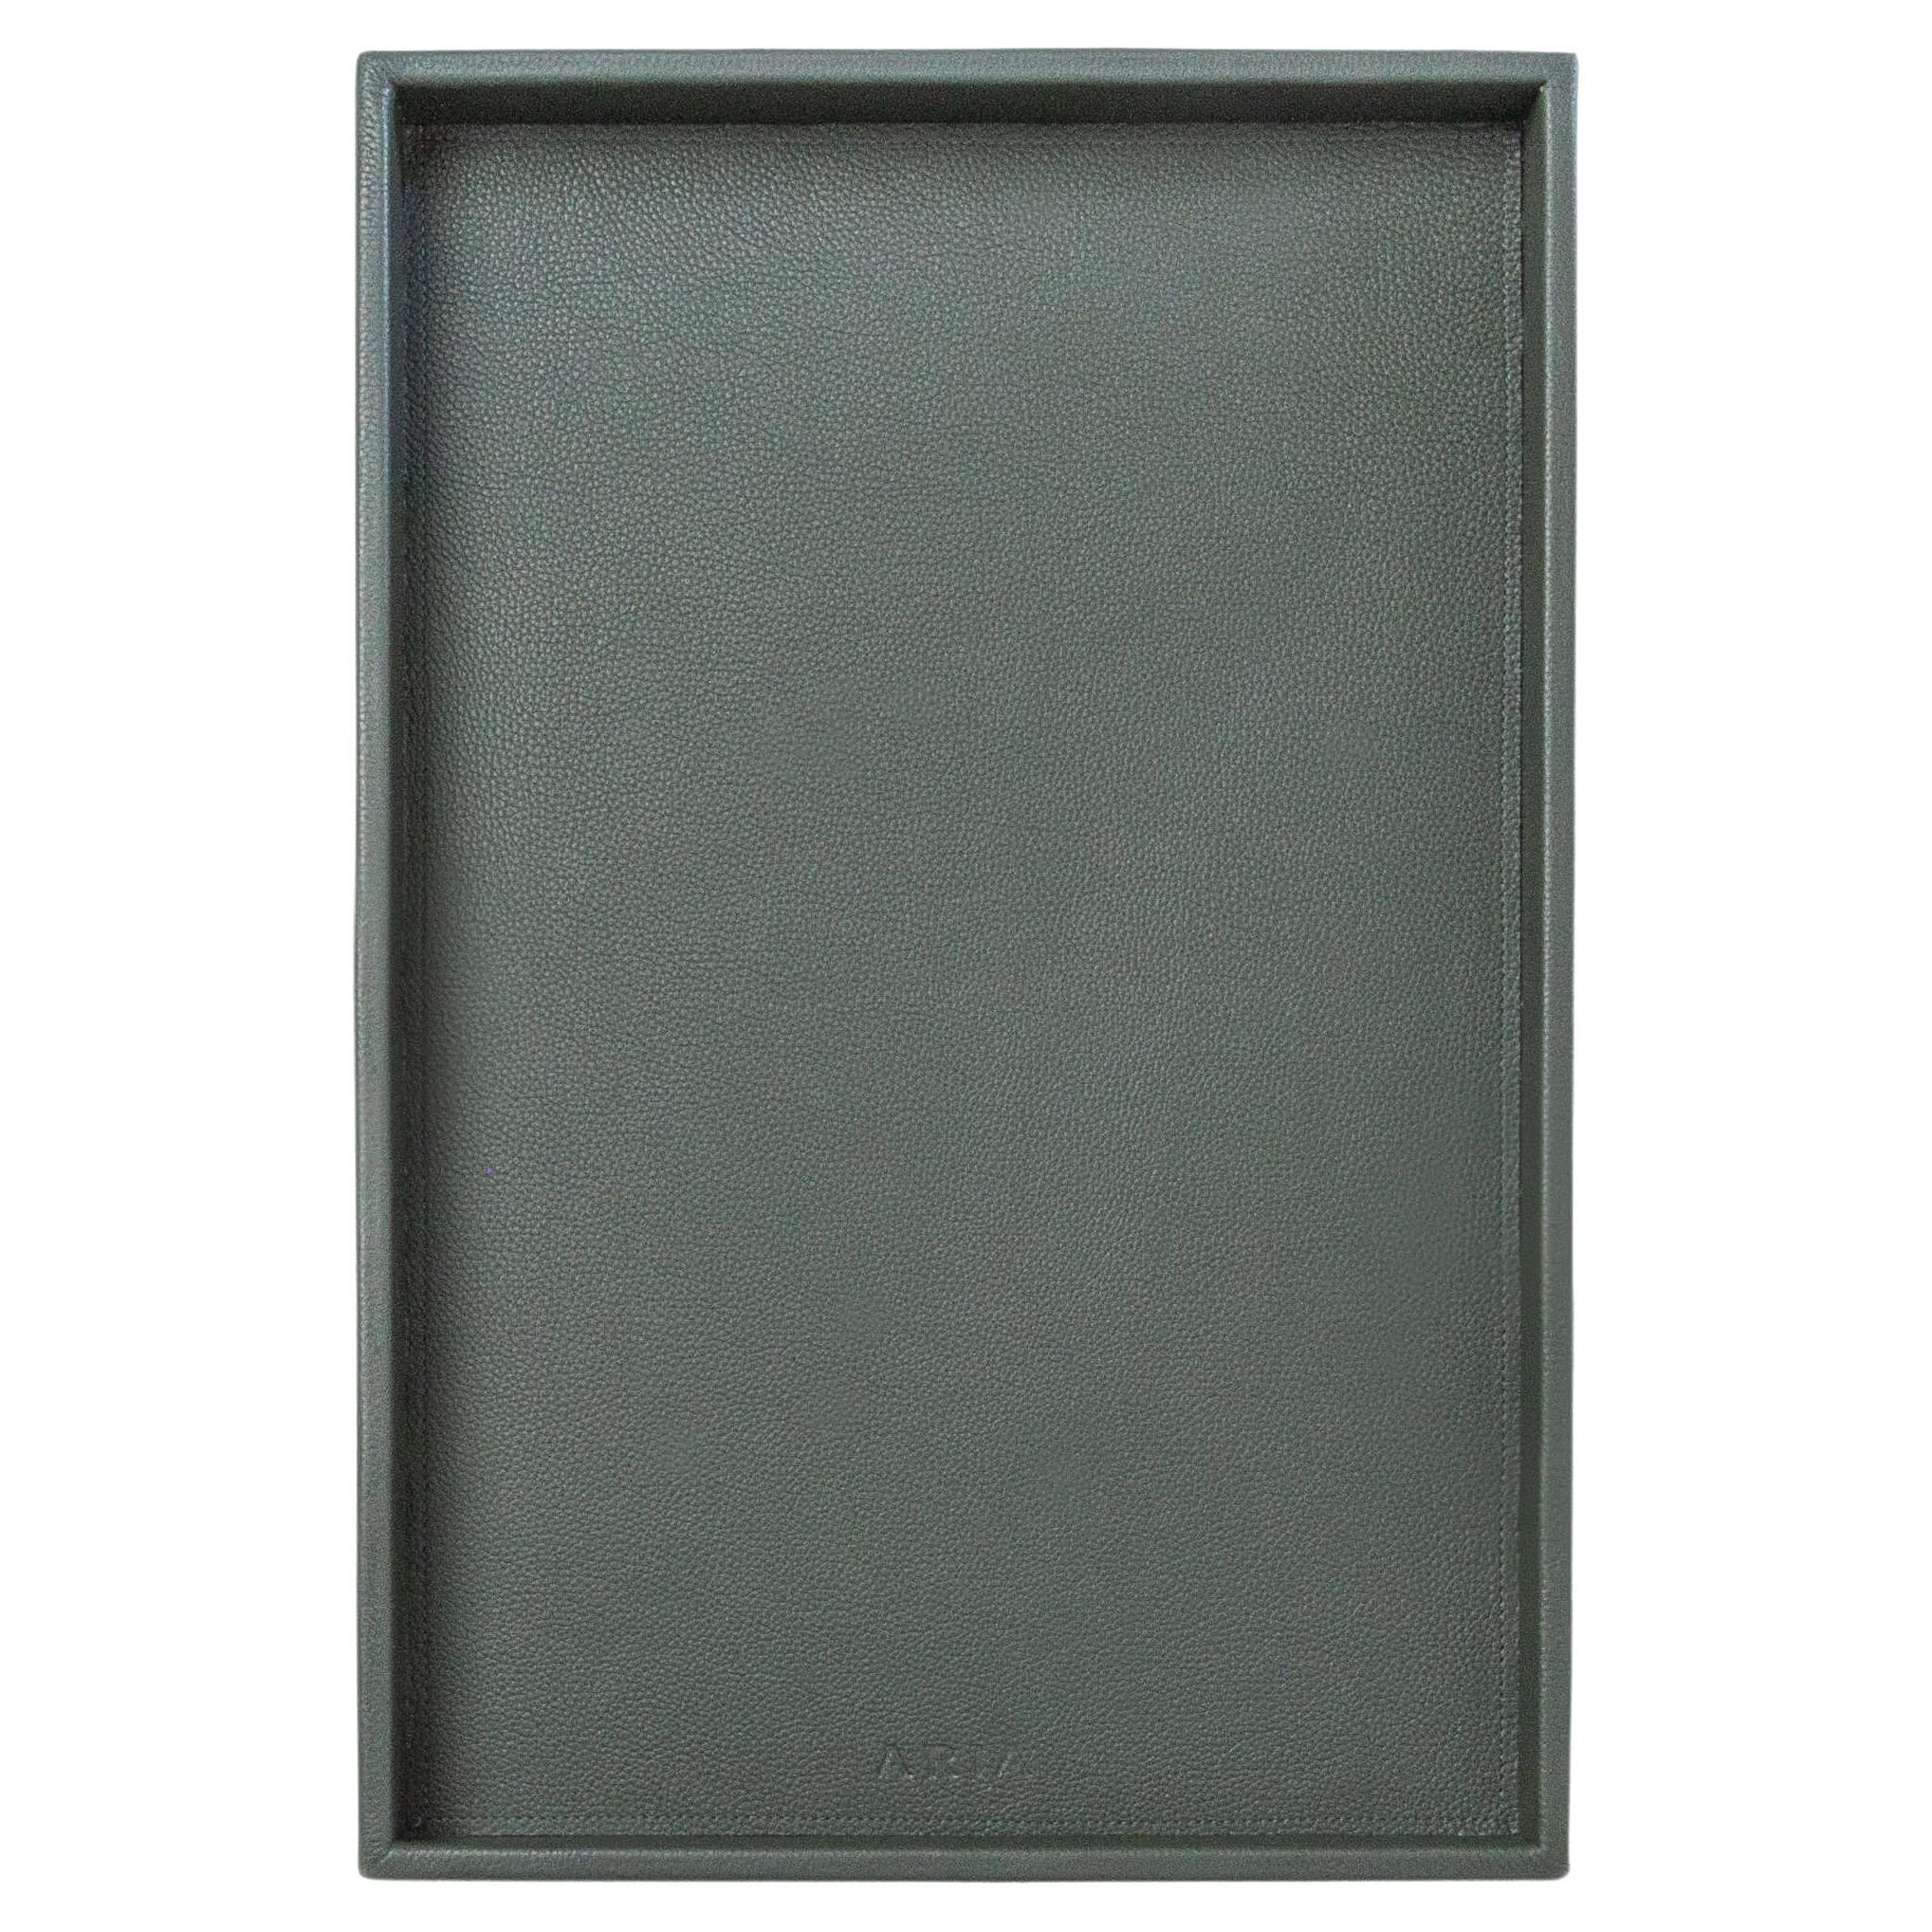 Modern Leather Tray, Large A Rectangular Tray, Handmade in Brazil - Color: Military For Sale